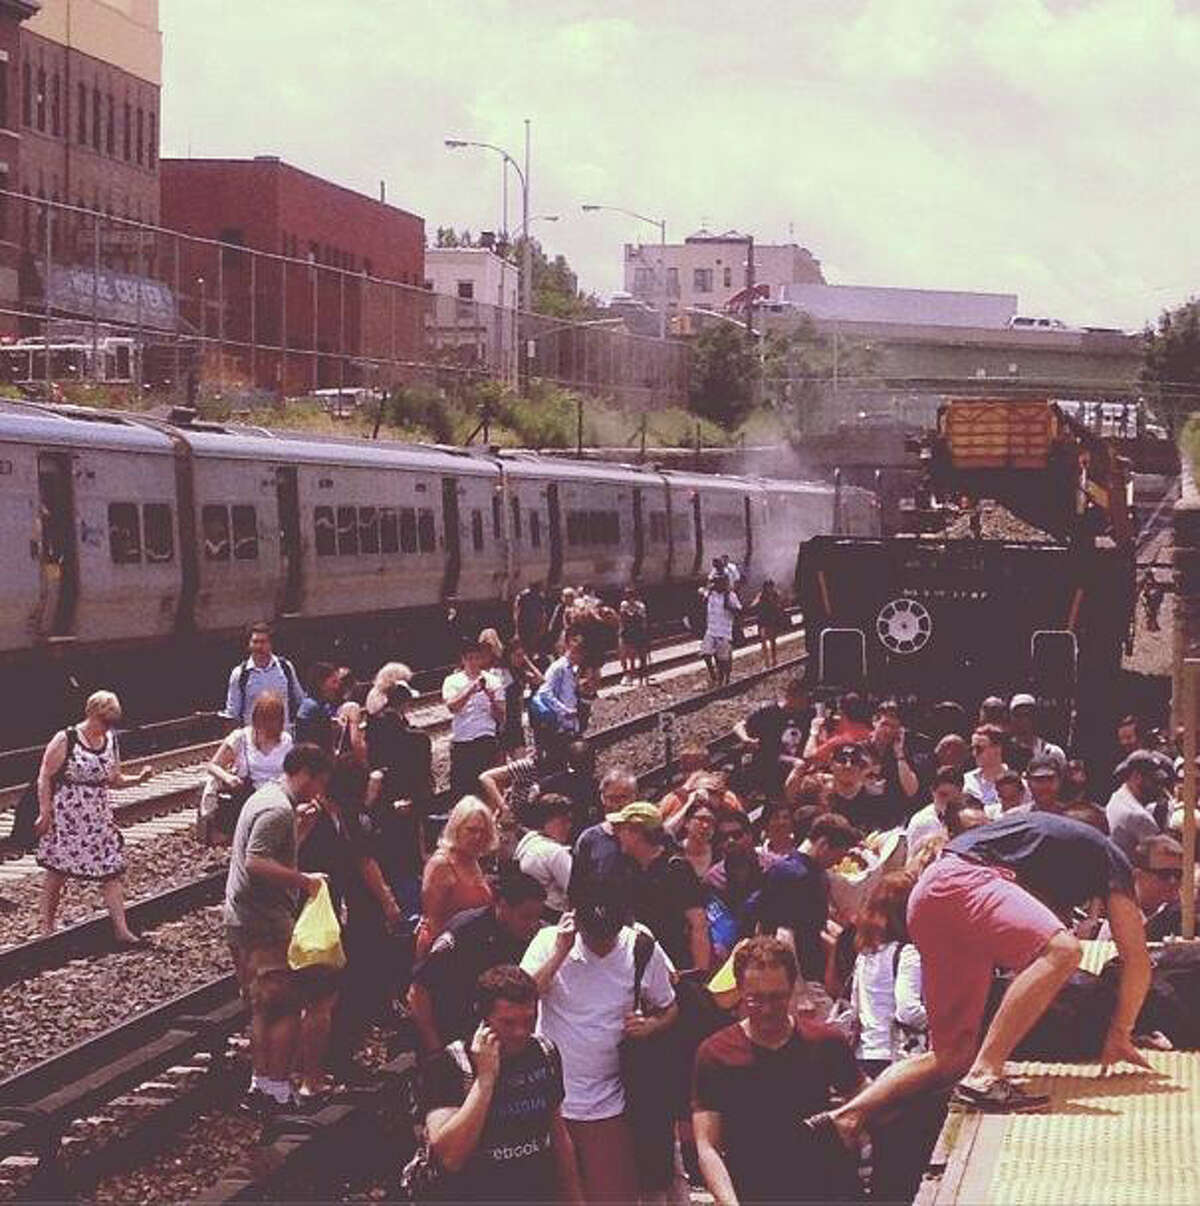 Passengers evacuated from a Metro-North commuter train after a fire was reported on the rear car Thursday, July 4, 2013. No injuries were reported, but service along the New Haven Line has been suspended indefinitely.